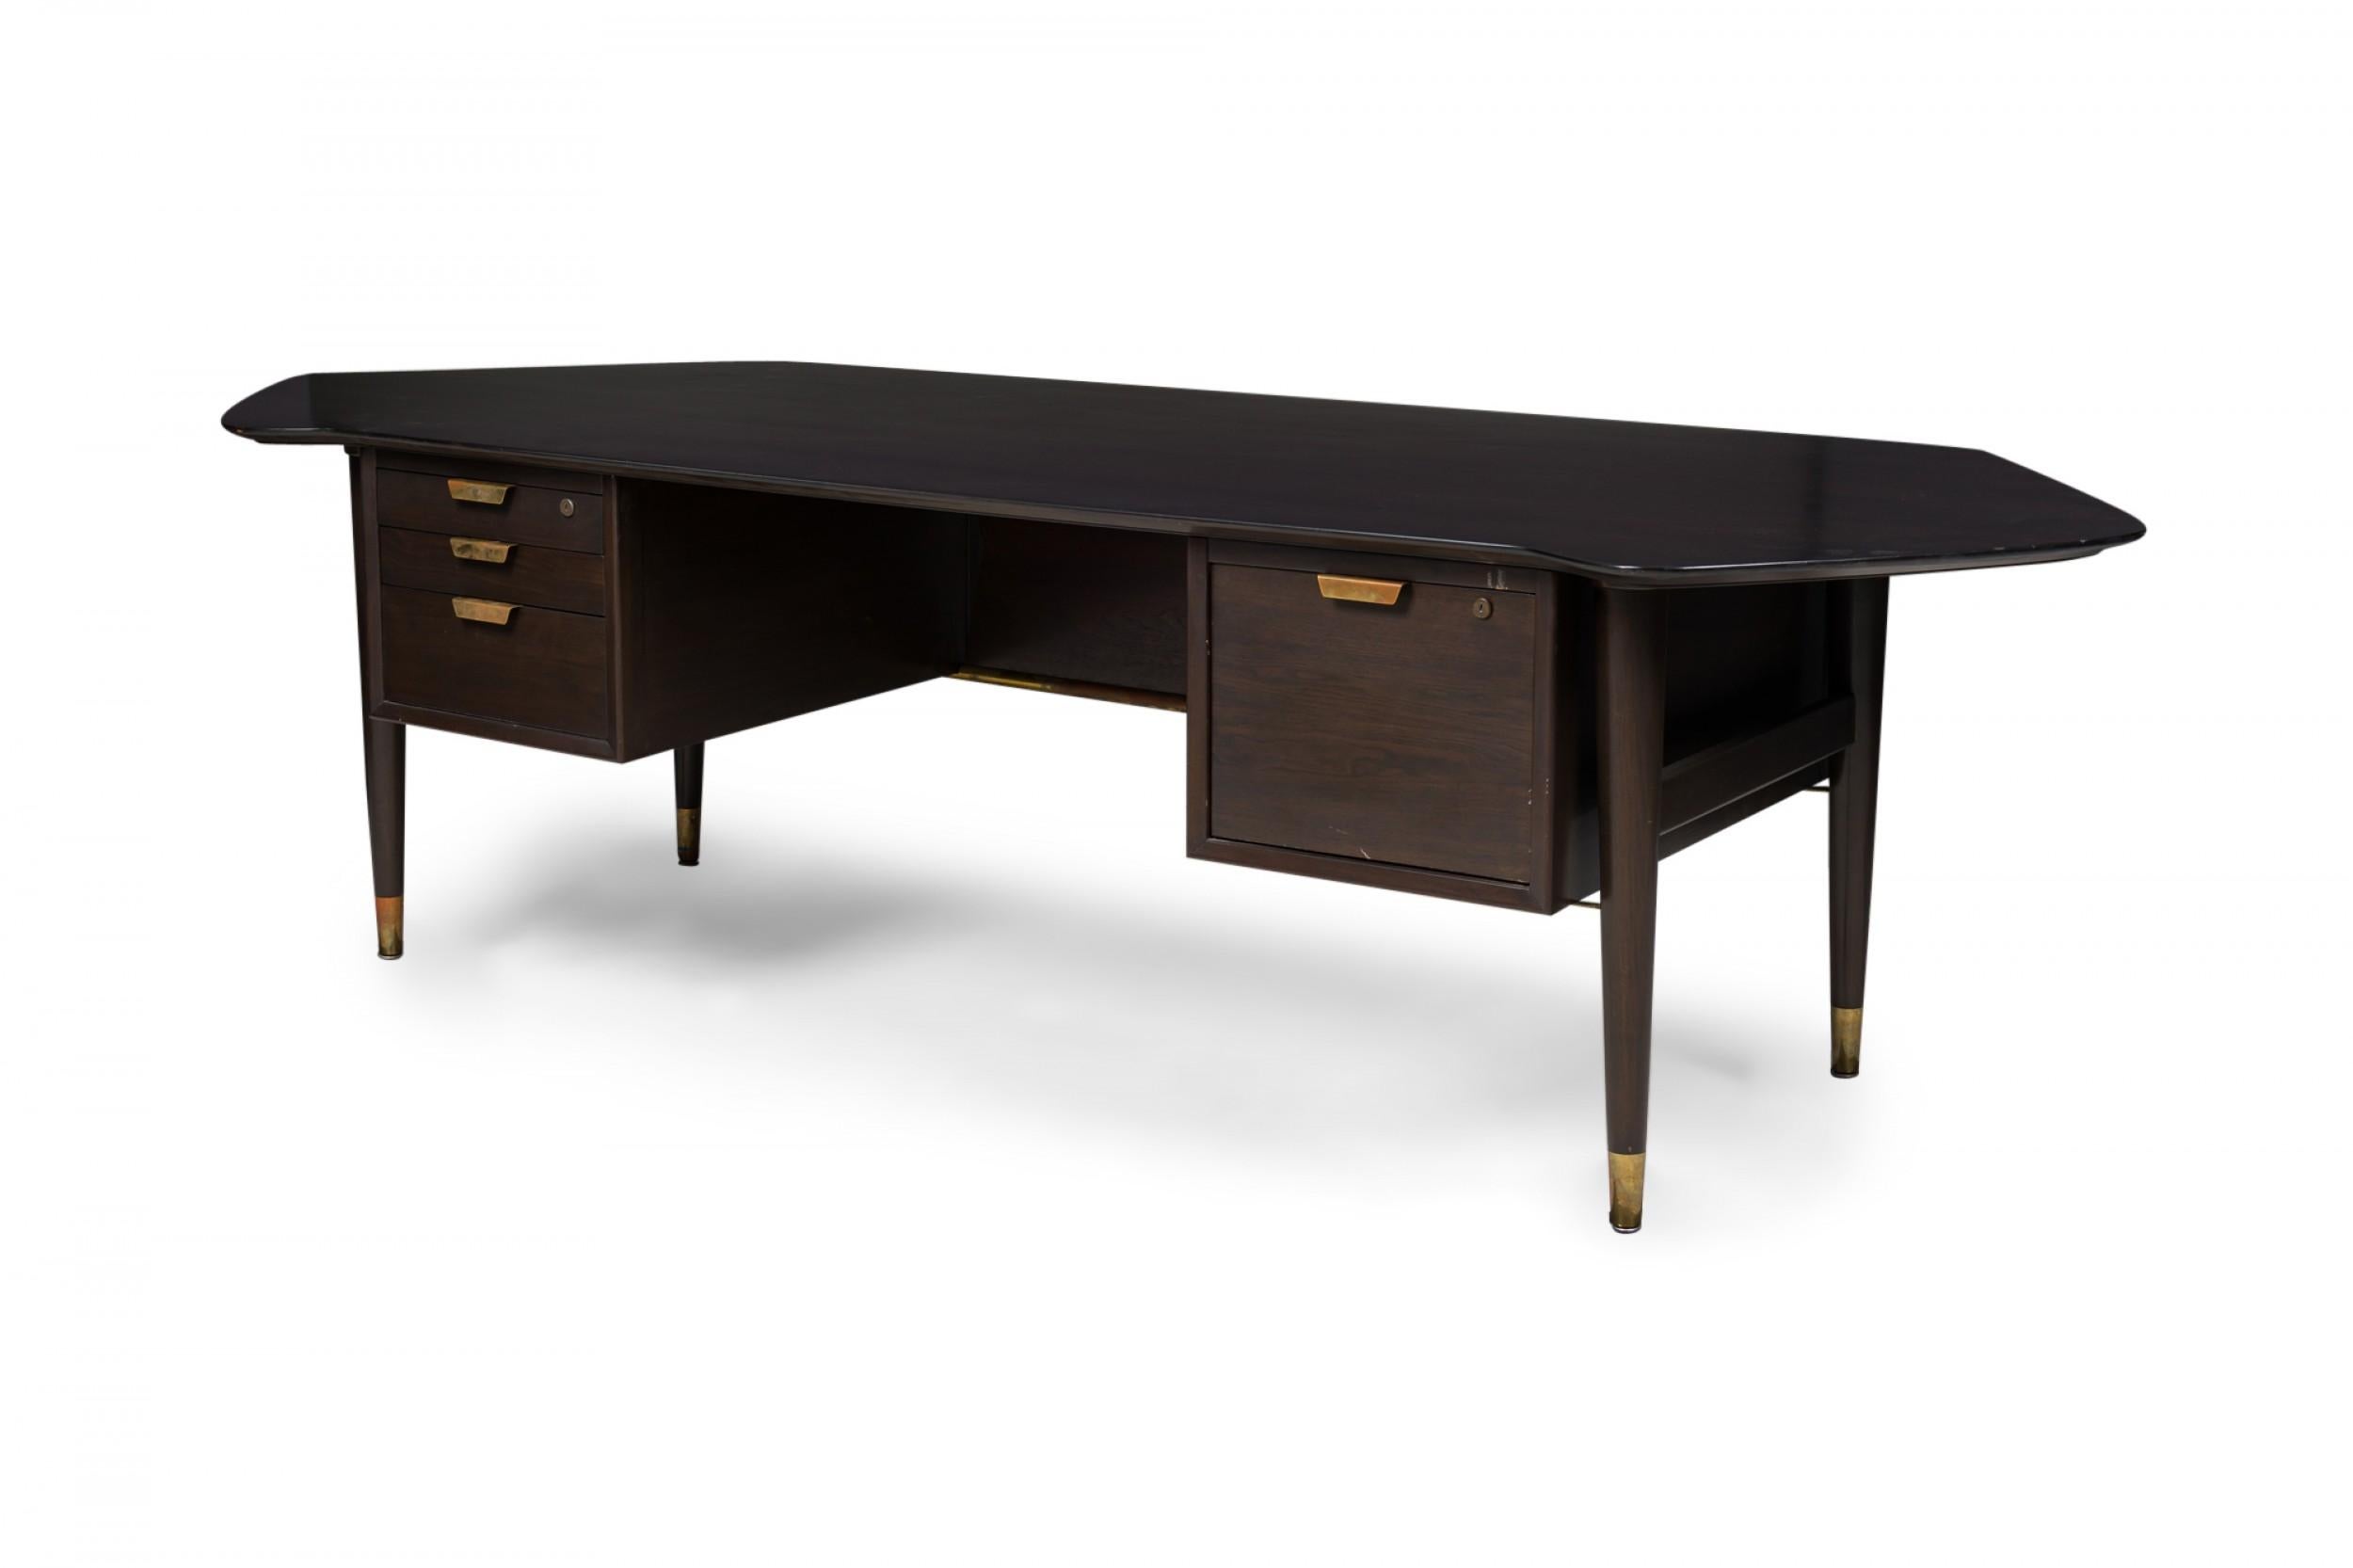 Contemporary Mid-Century-style dark wood veneer executive desk with an angular desktop supported by two column drawers with front privacy panel, resting on four tapered wood and brass legs. (STANDARD FURNITURE COMPANY, HERKIMER, NY).